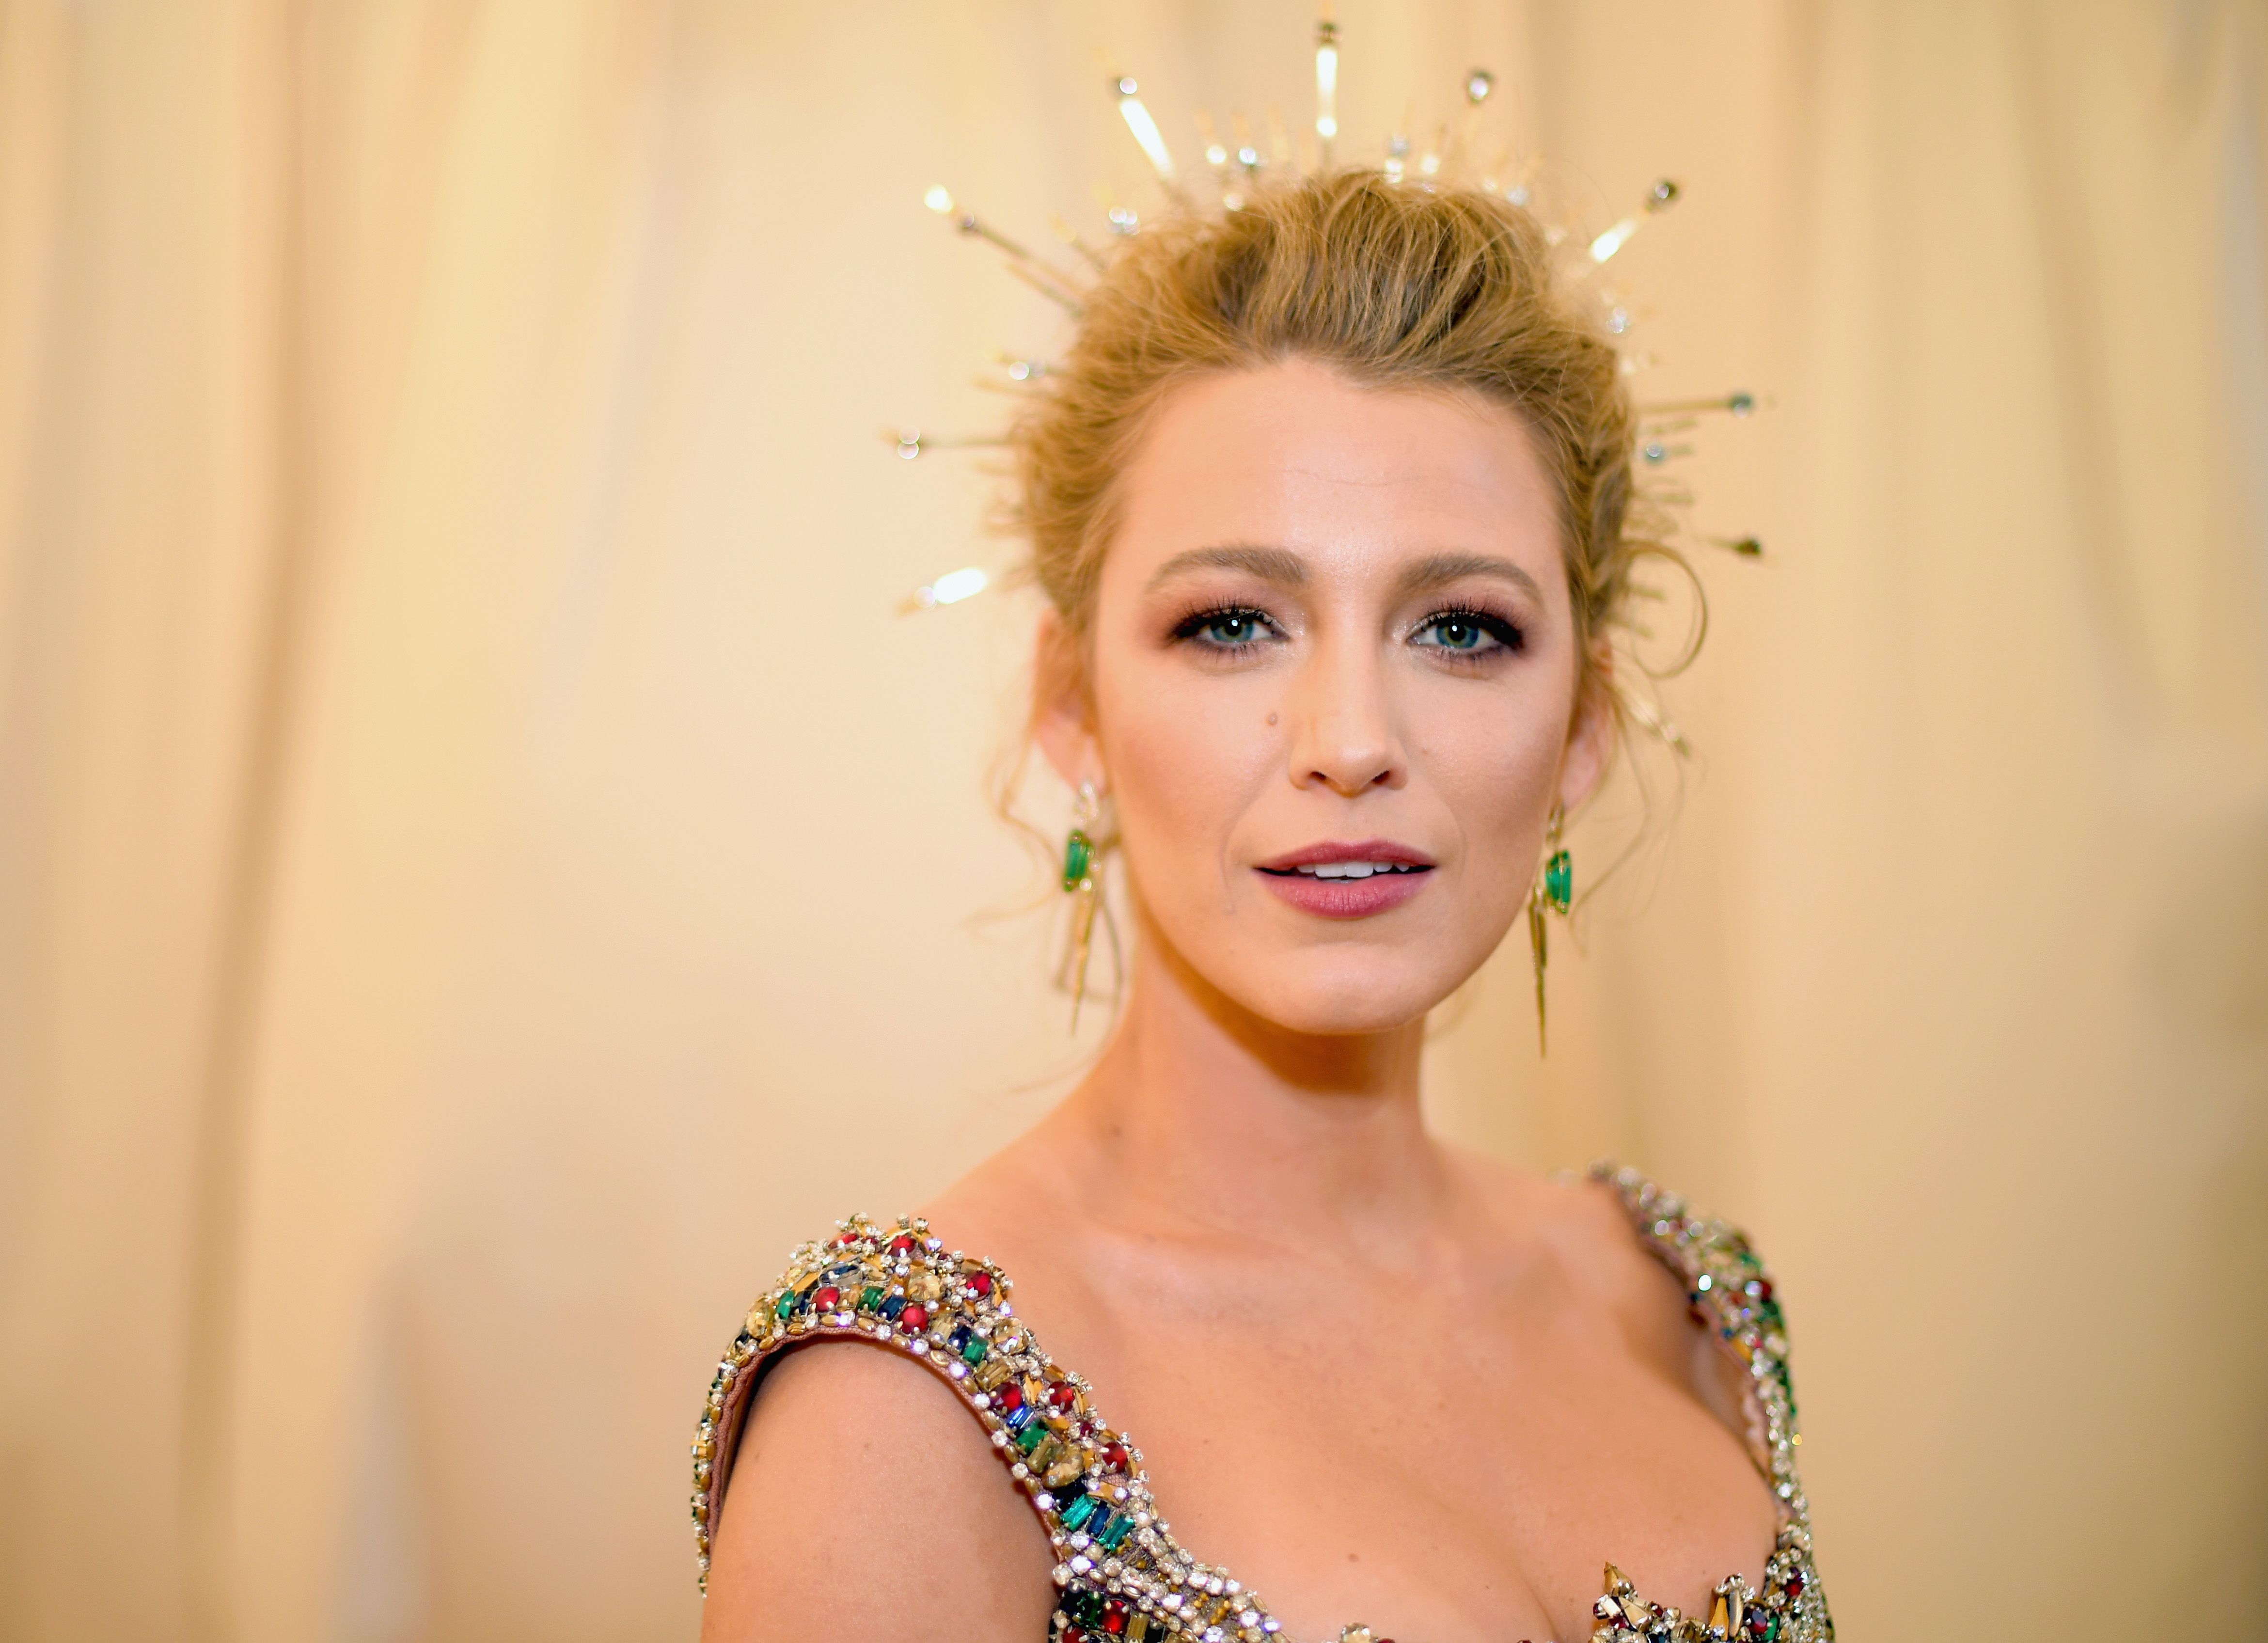 Blake Lively Attends Met Gala Without Ryan